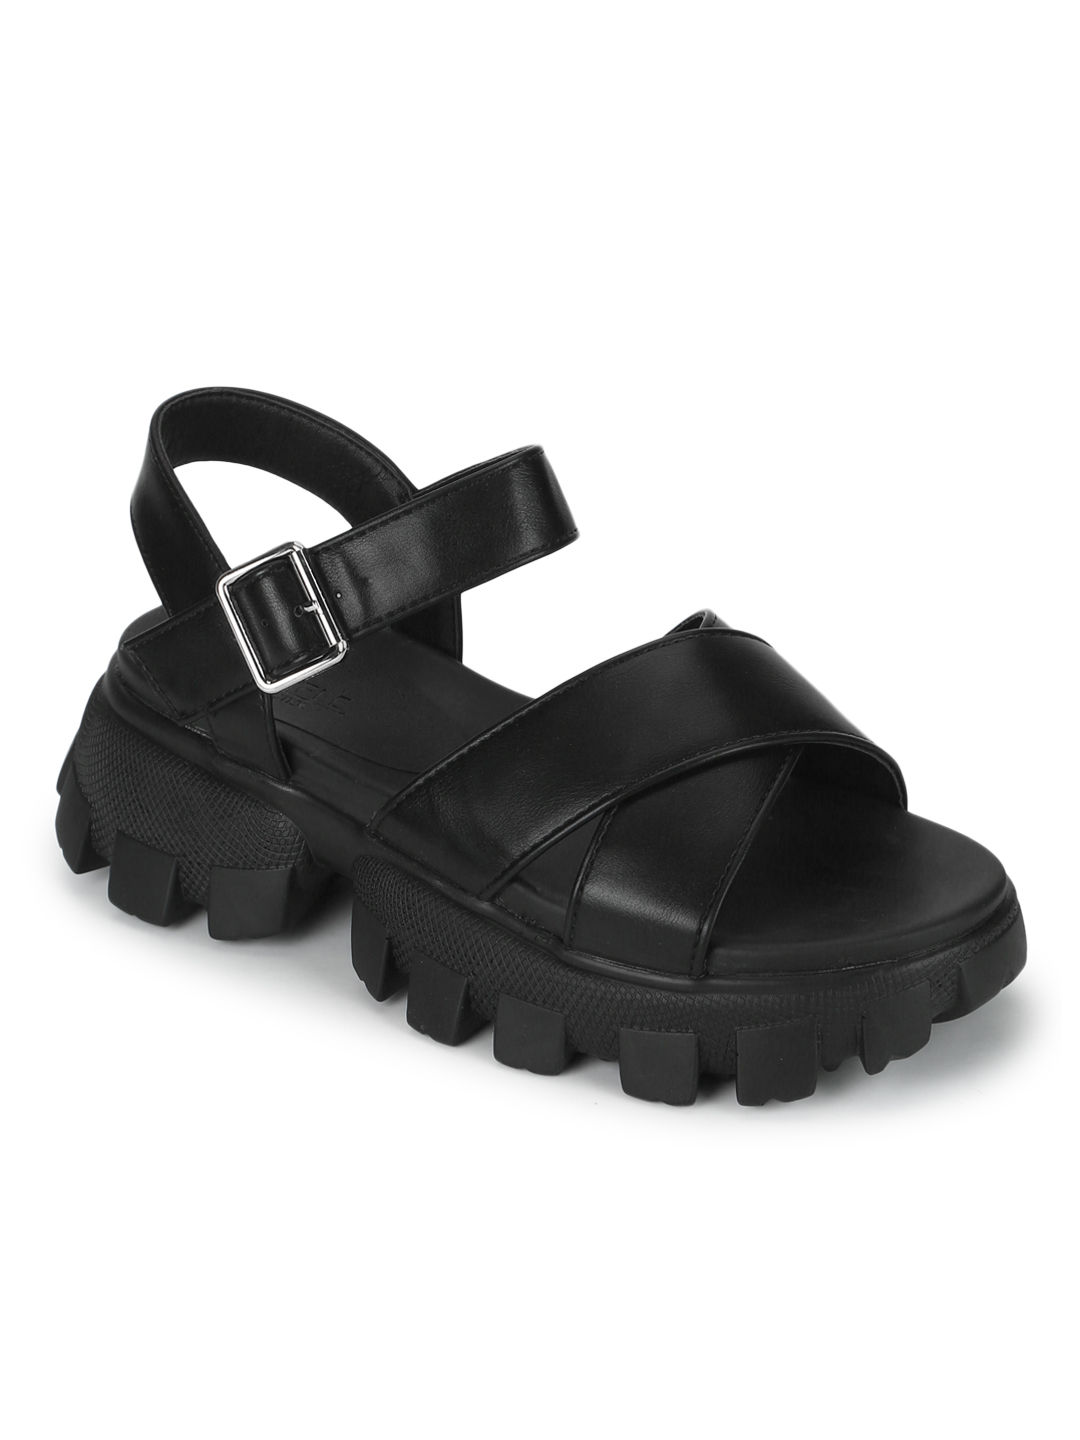 10 Chunky Platform Sandal Outfits to Try ASAP